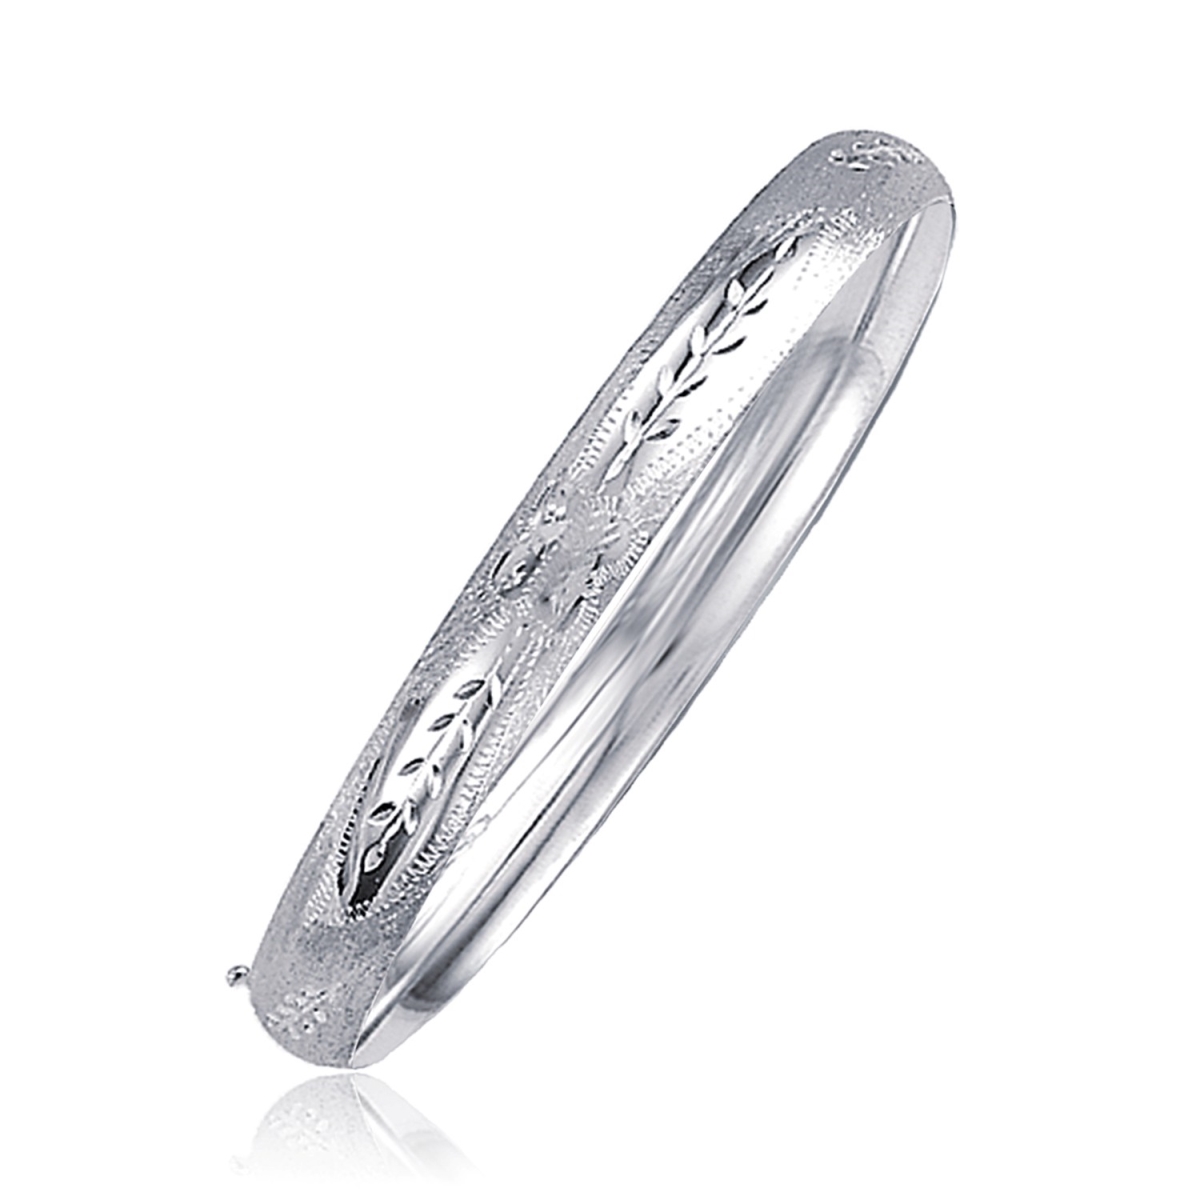 Picture of Iconic Jewels D126448-7 Classic Floral Carved Bangle in 14k White Gold - 6 mm - Size 7 in.